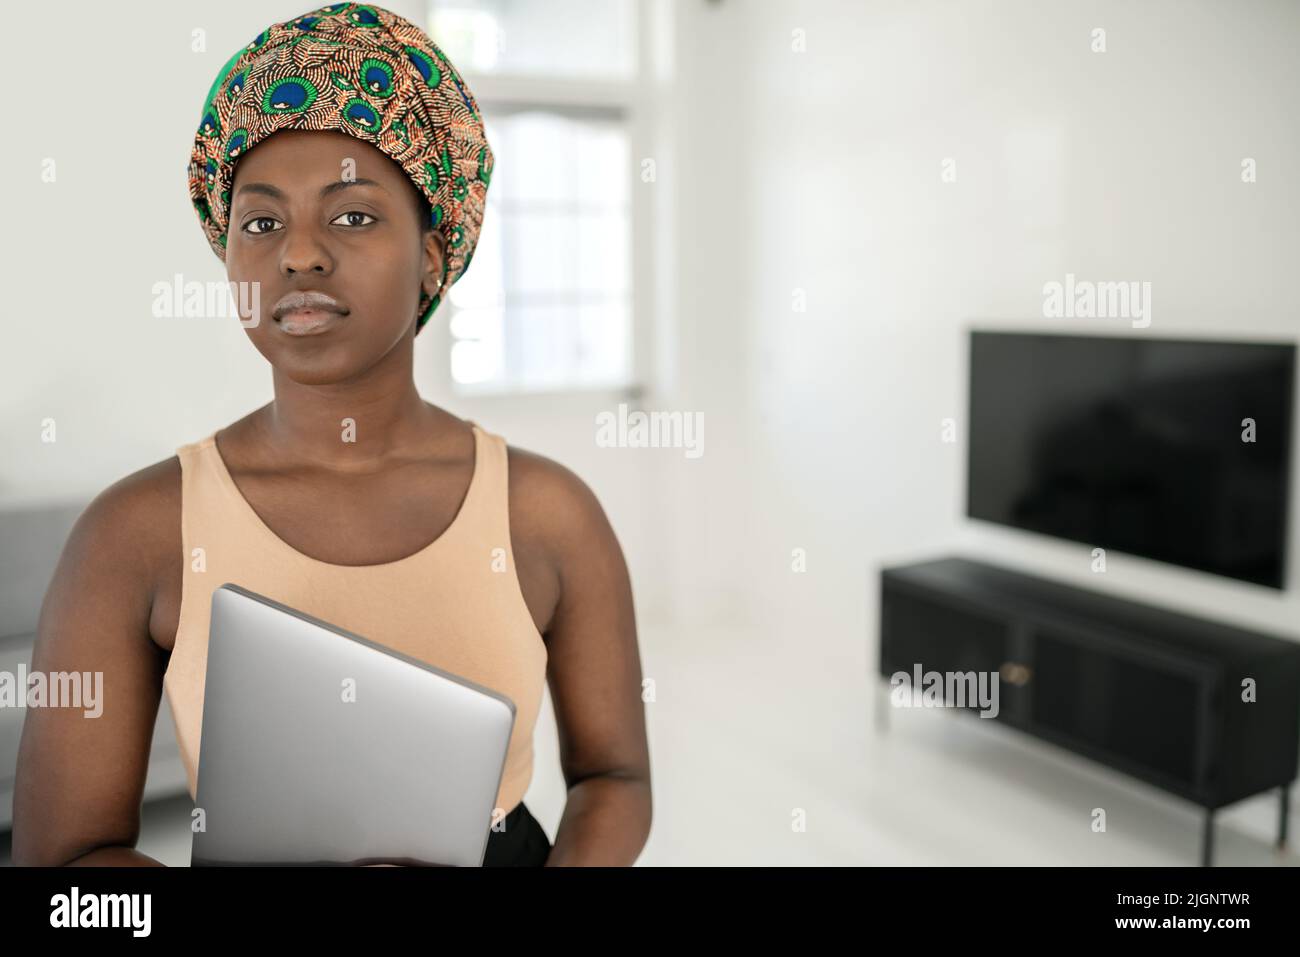 Portrait of beautiful African woman standing in modern home with laptop in hand looking into camera, wearing a traditional head tie scarf Stock Photo